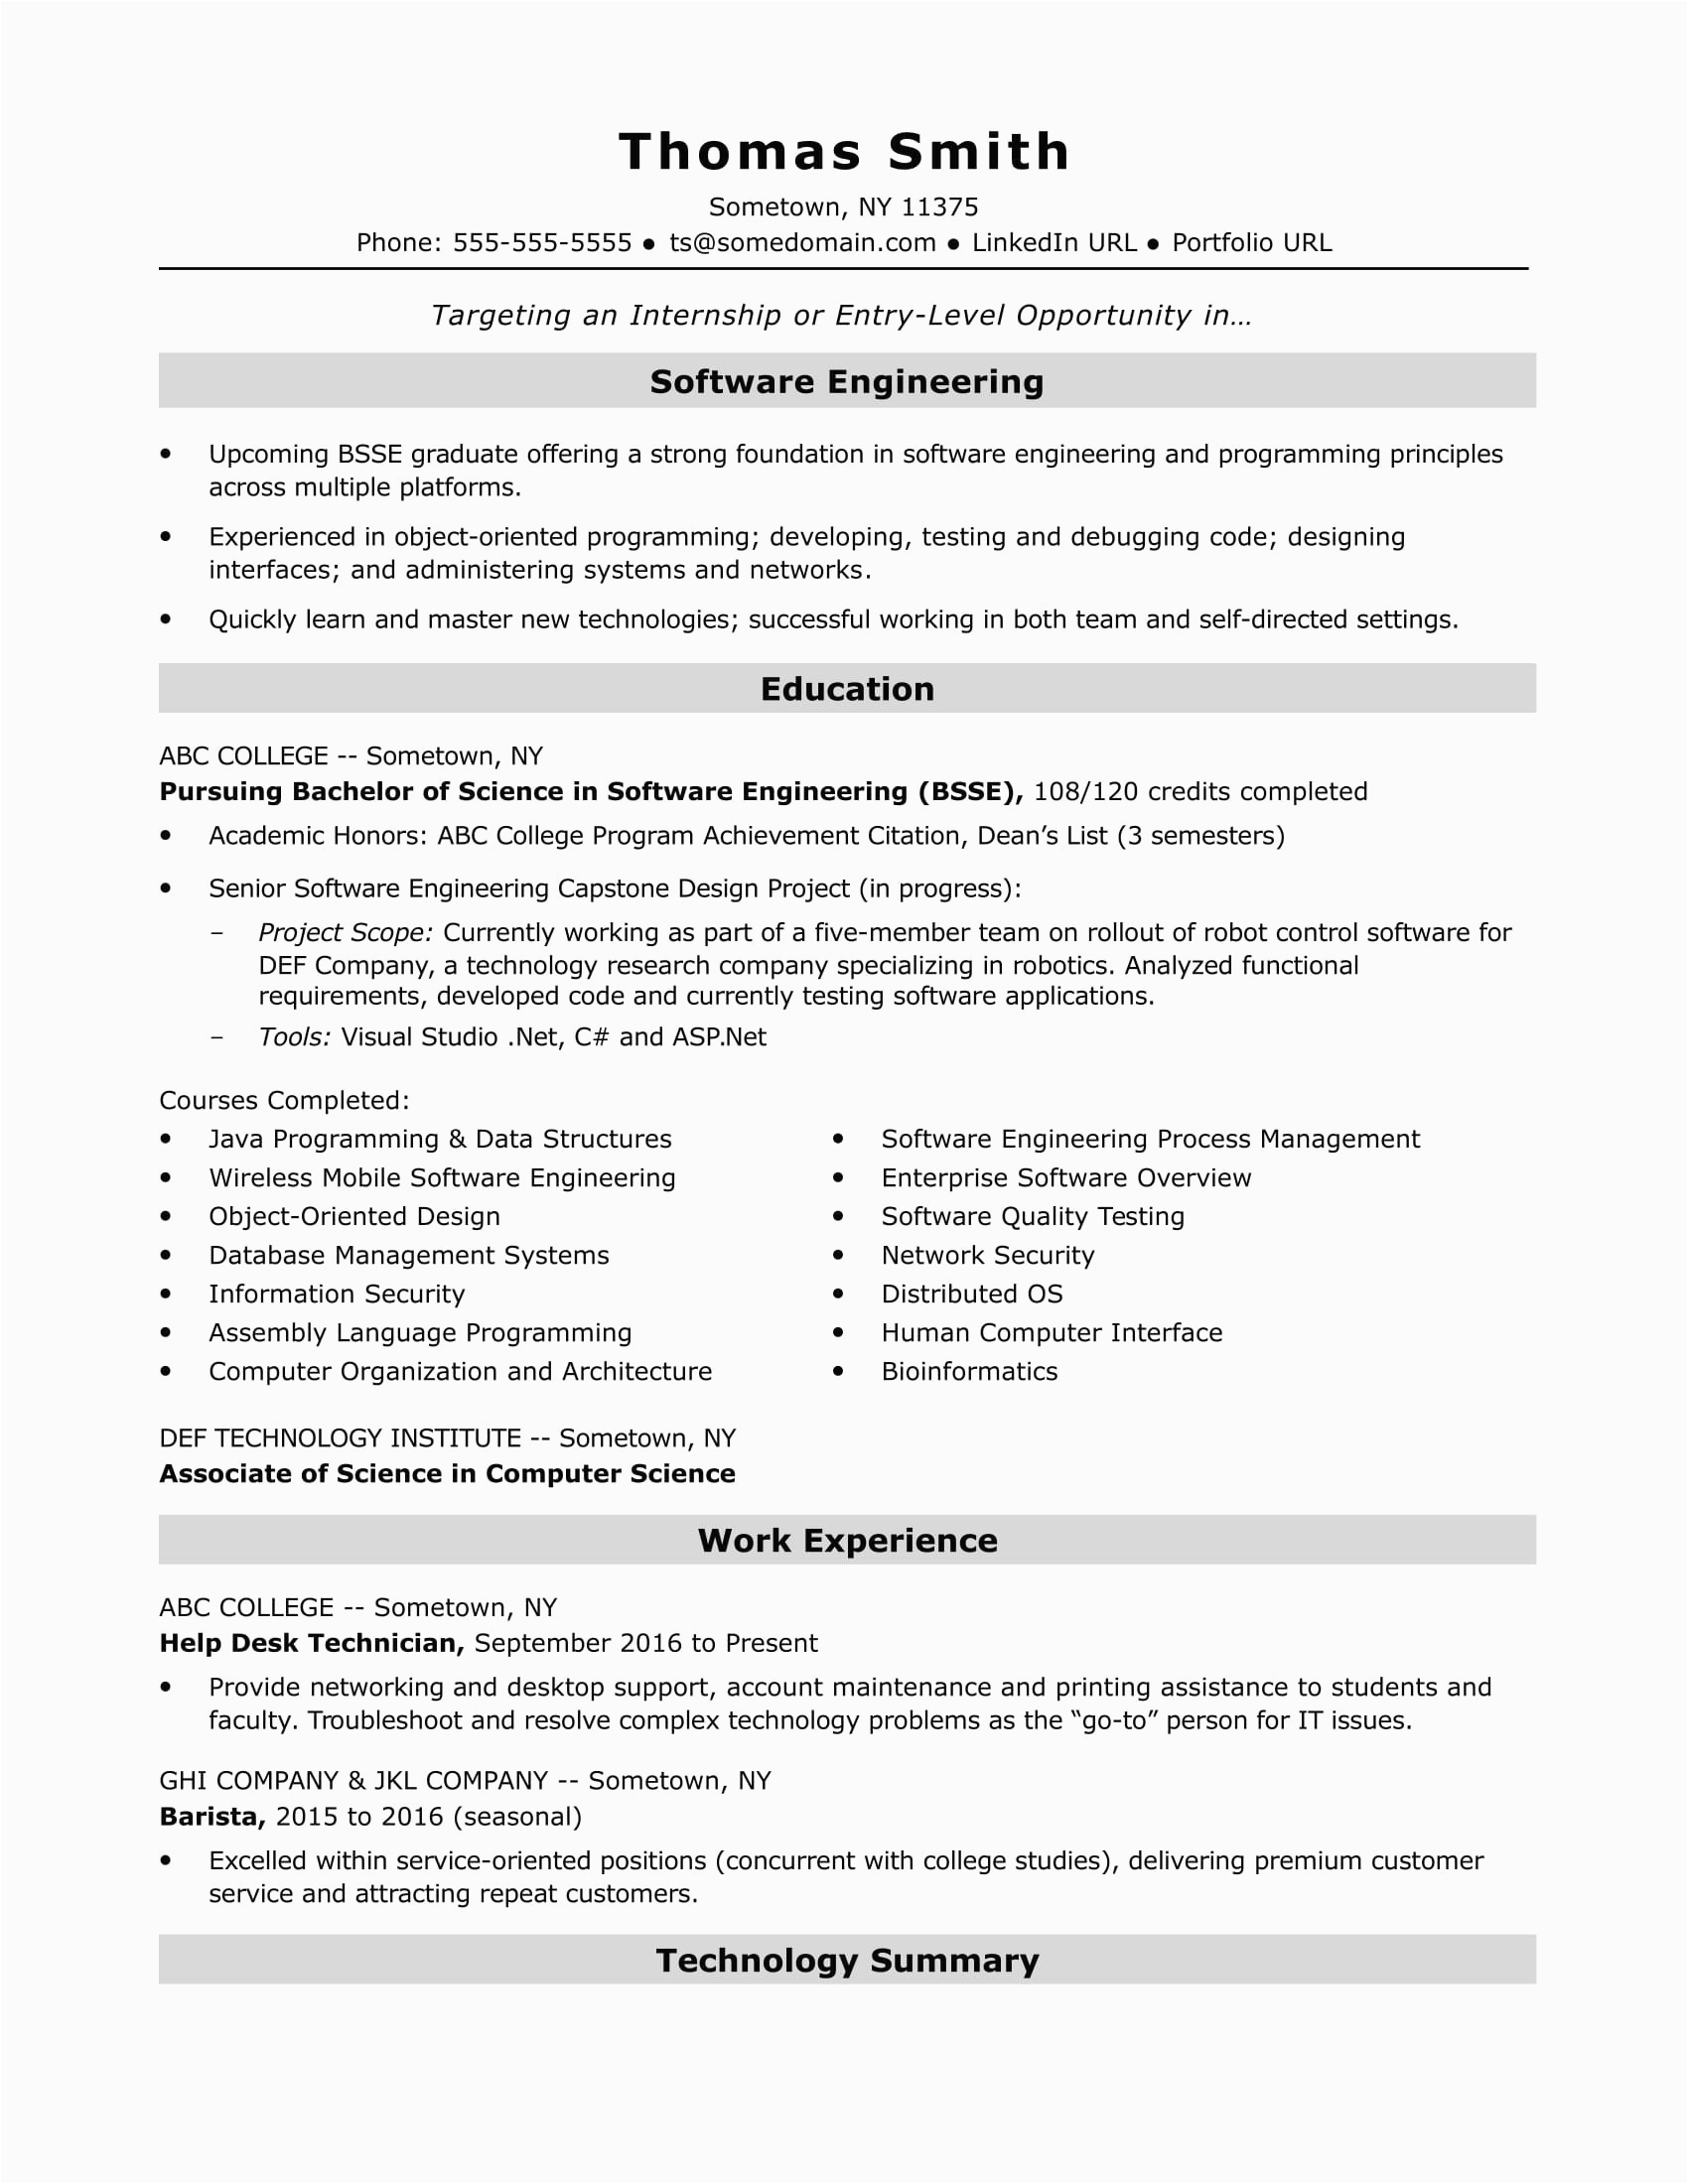 Software Engineer Sample Resume No Experience software Engineer Resume No Experience